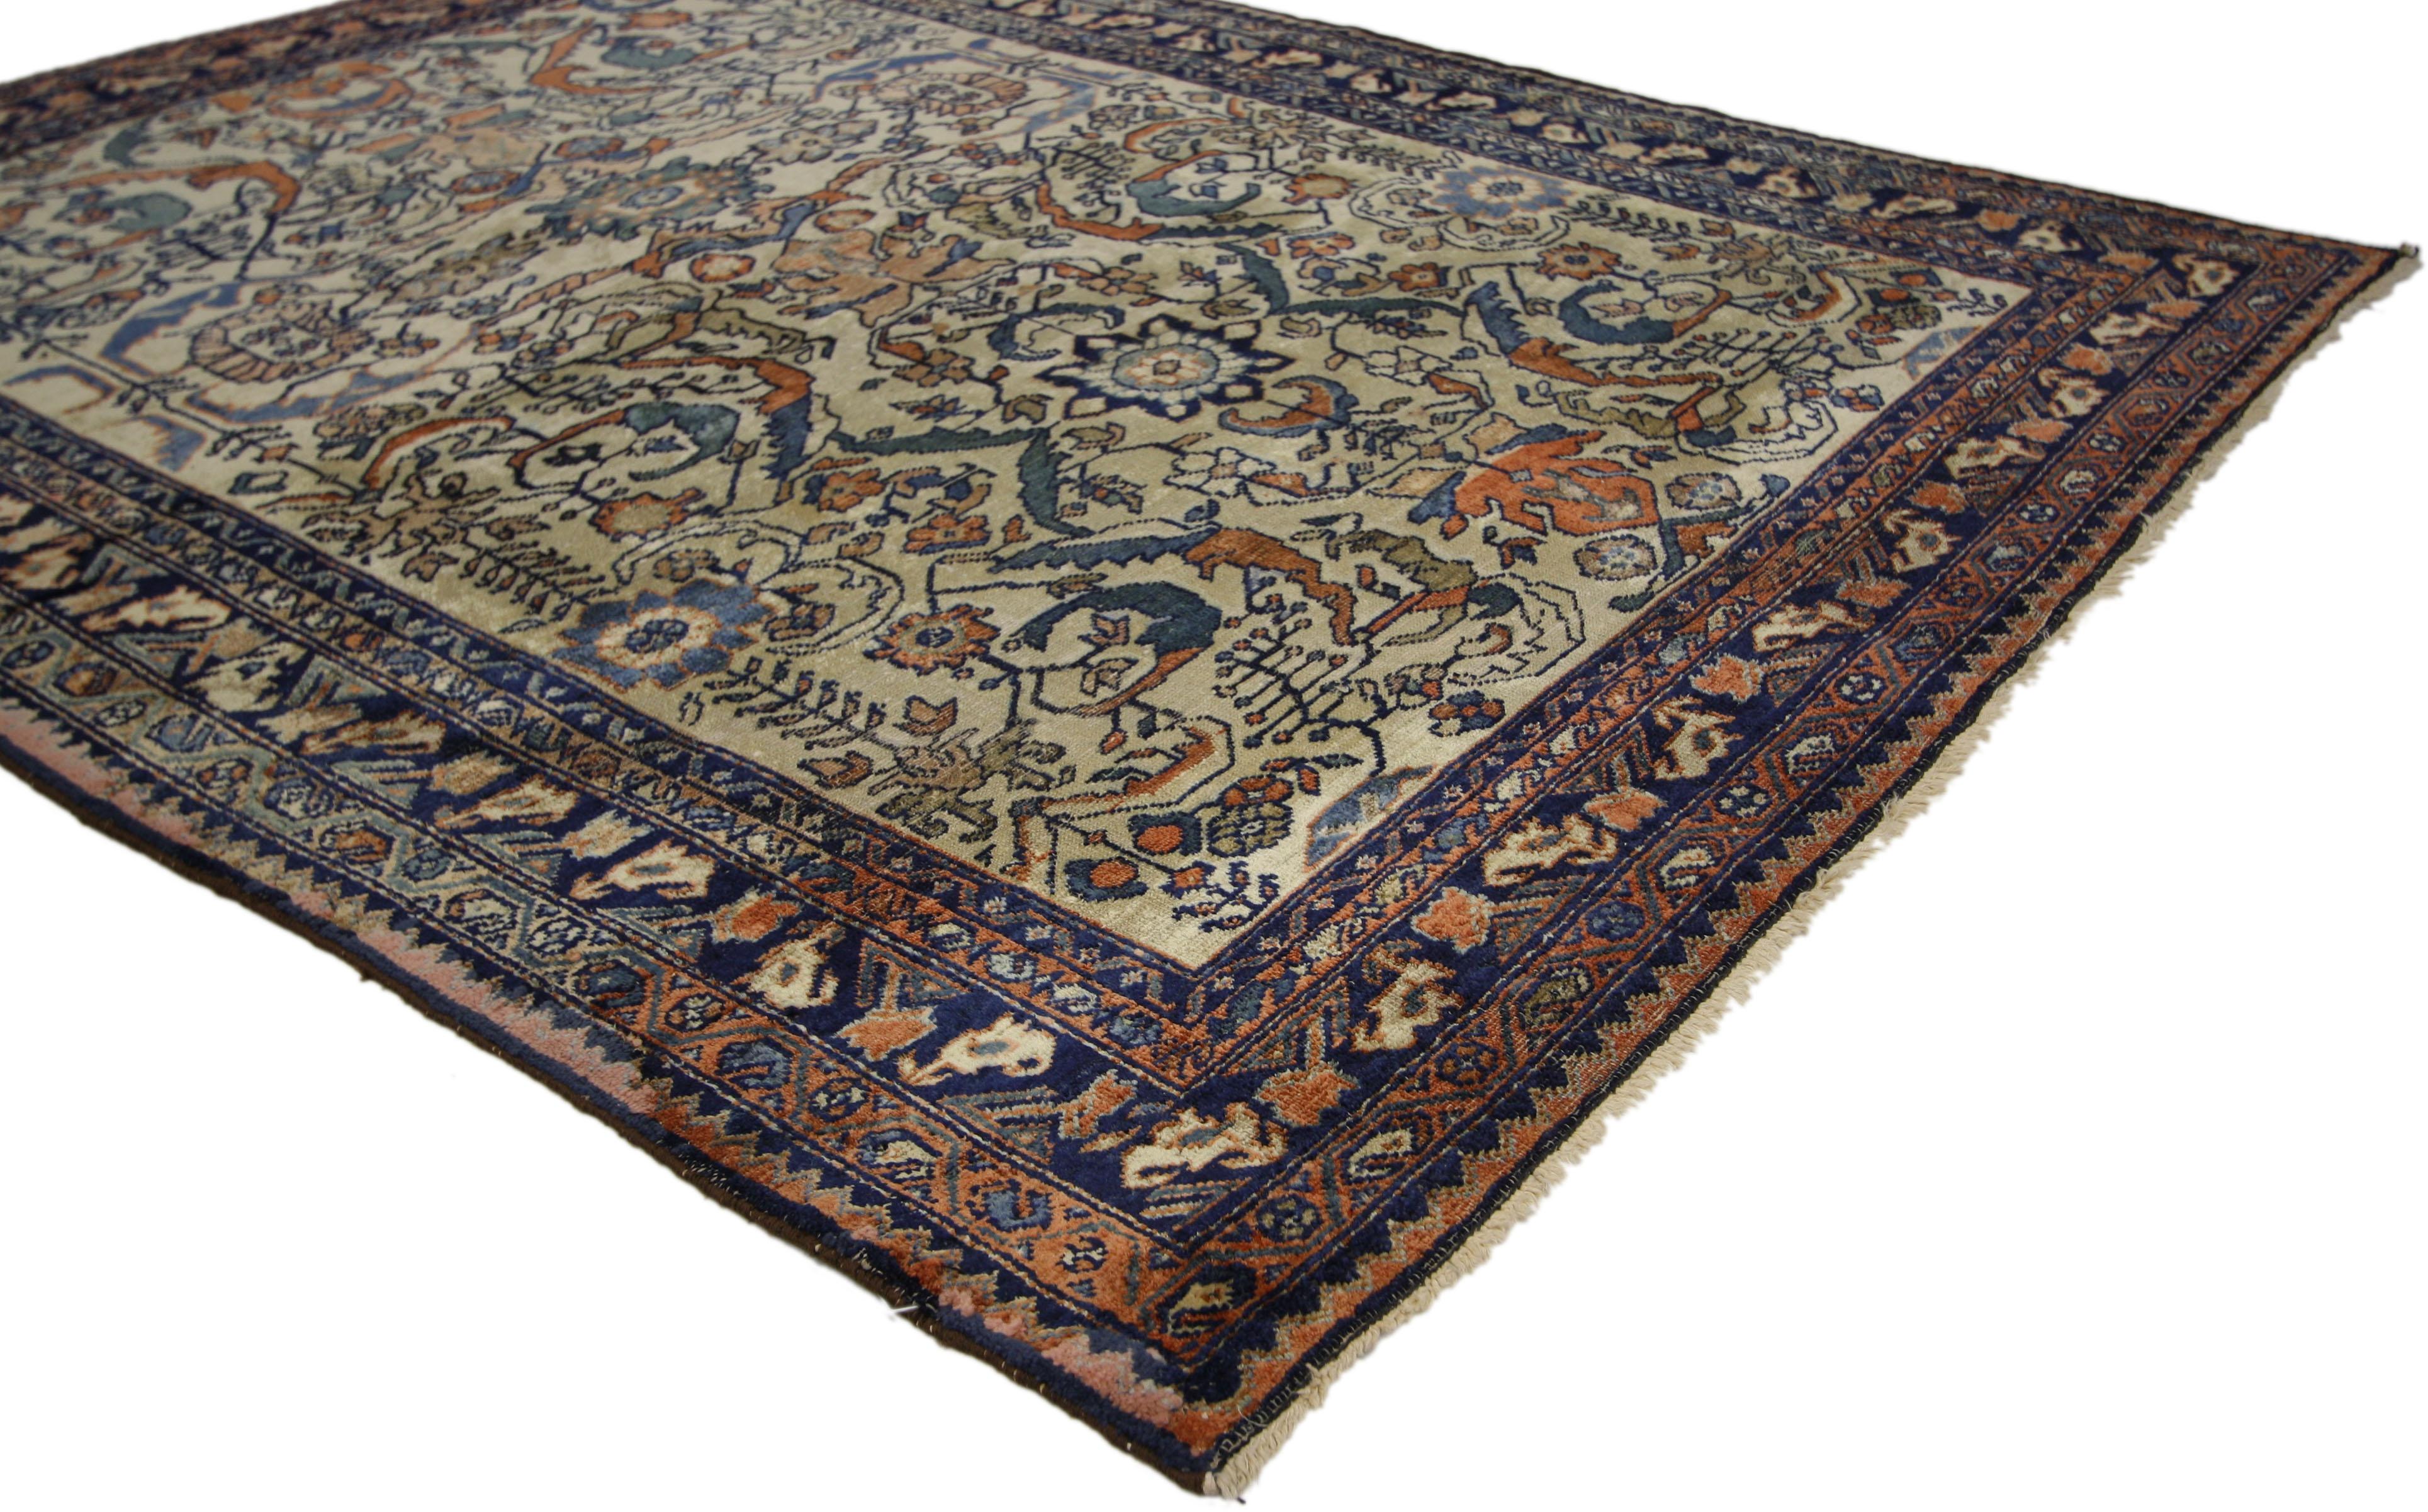 73623, Antique Persian Lilihan Area Rug with Rustic Romantic Industrial Style 04'10 x 06'01. This hand knotted wool antique Persian Lilihan area rug with Industrial style features poly-chromatic stylized florals and foliate patterns on a light color